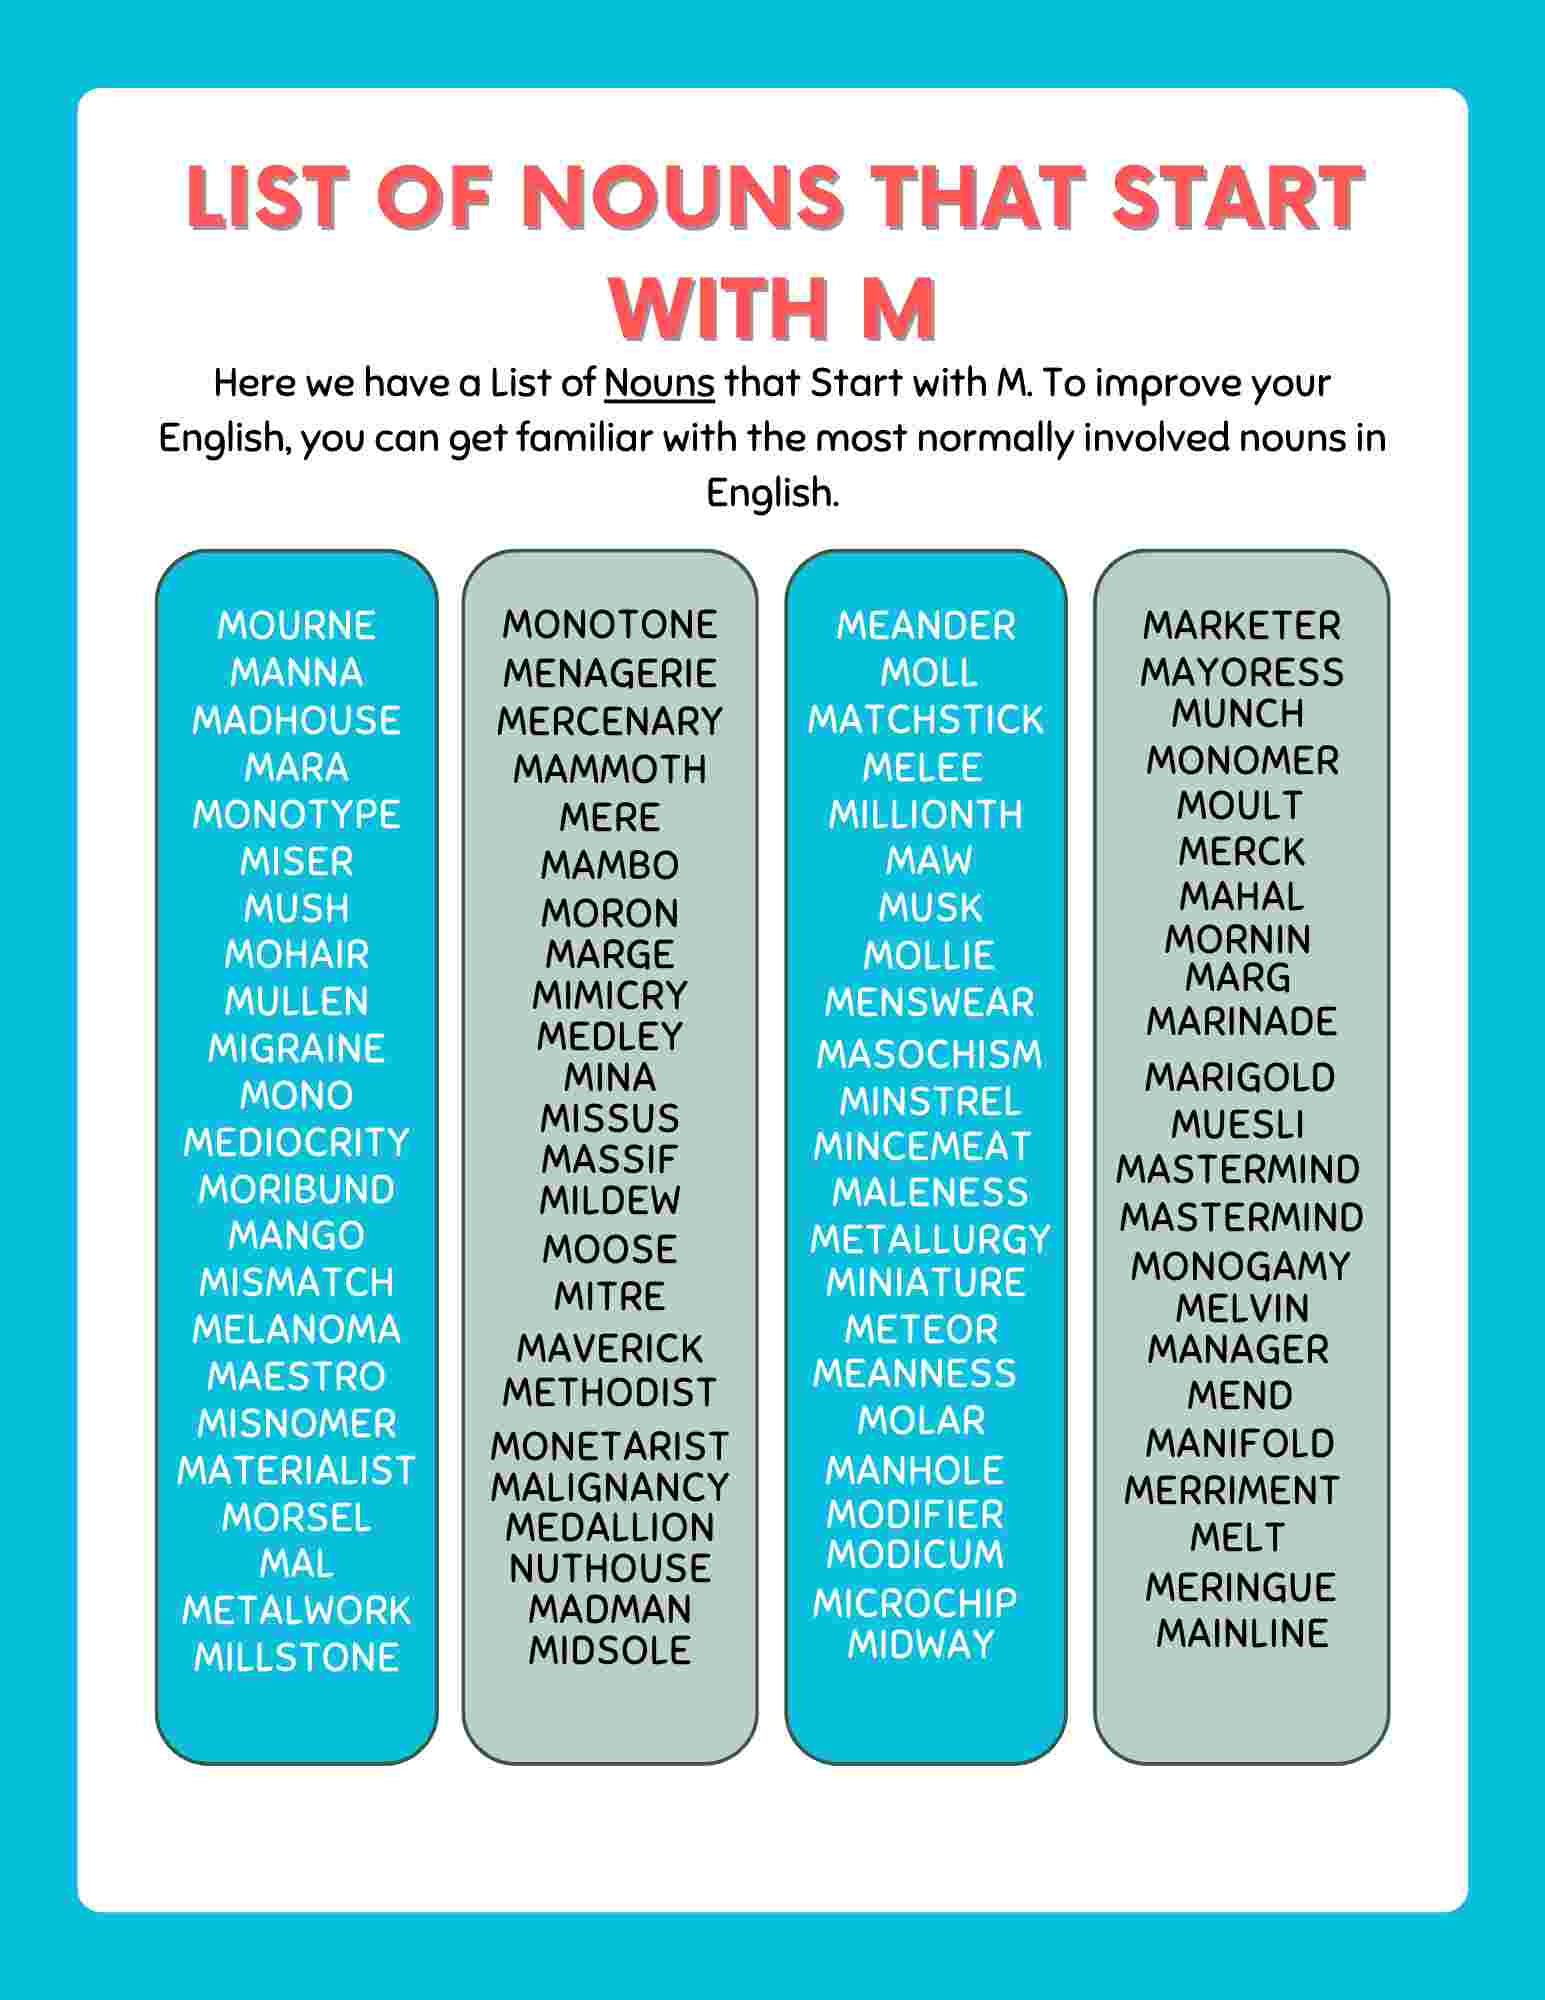 Nouns that Start With M